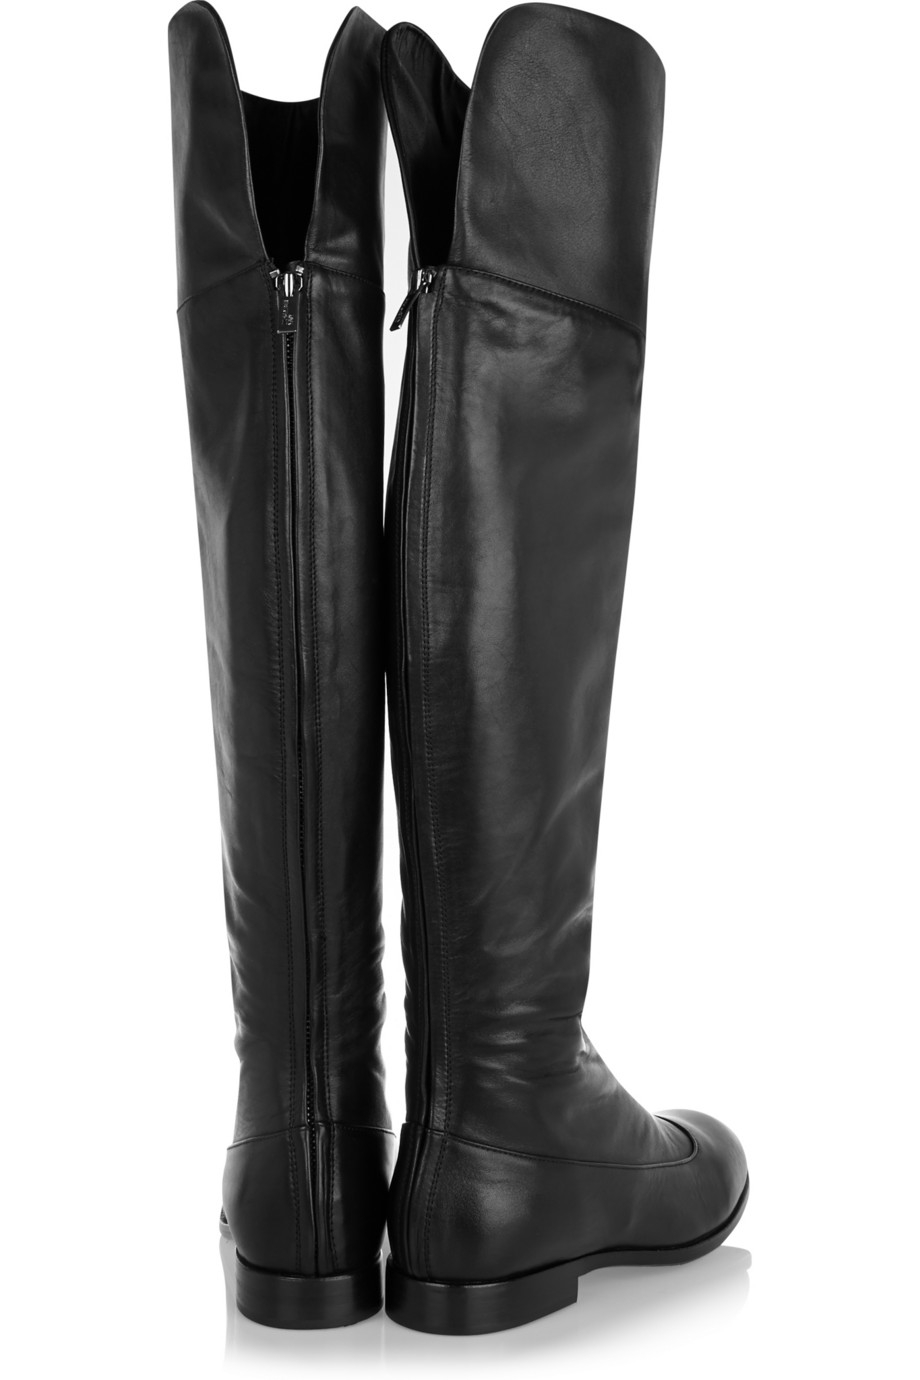 above the knee leather boots